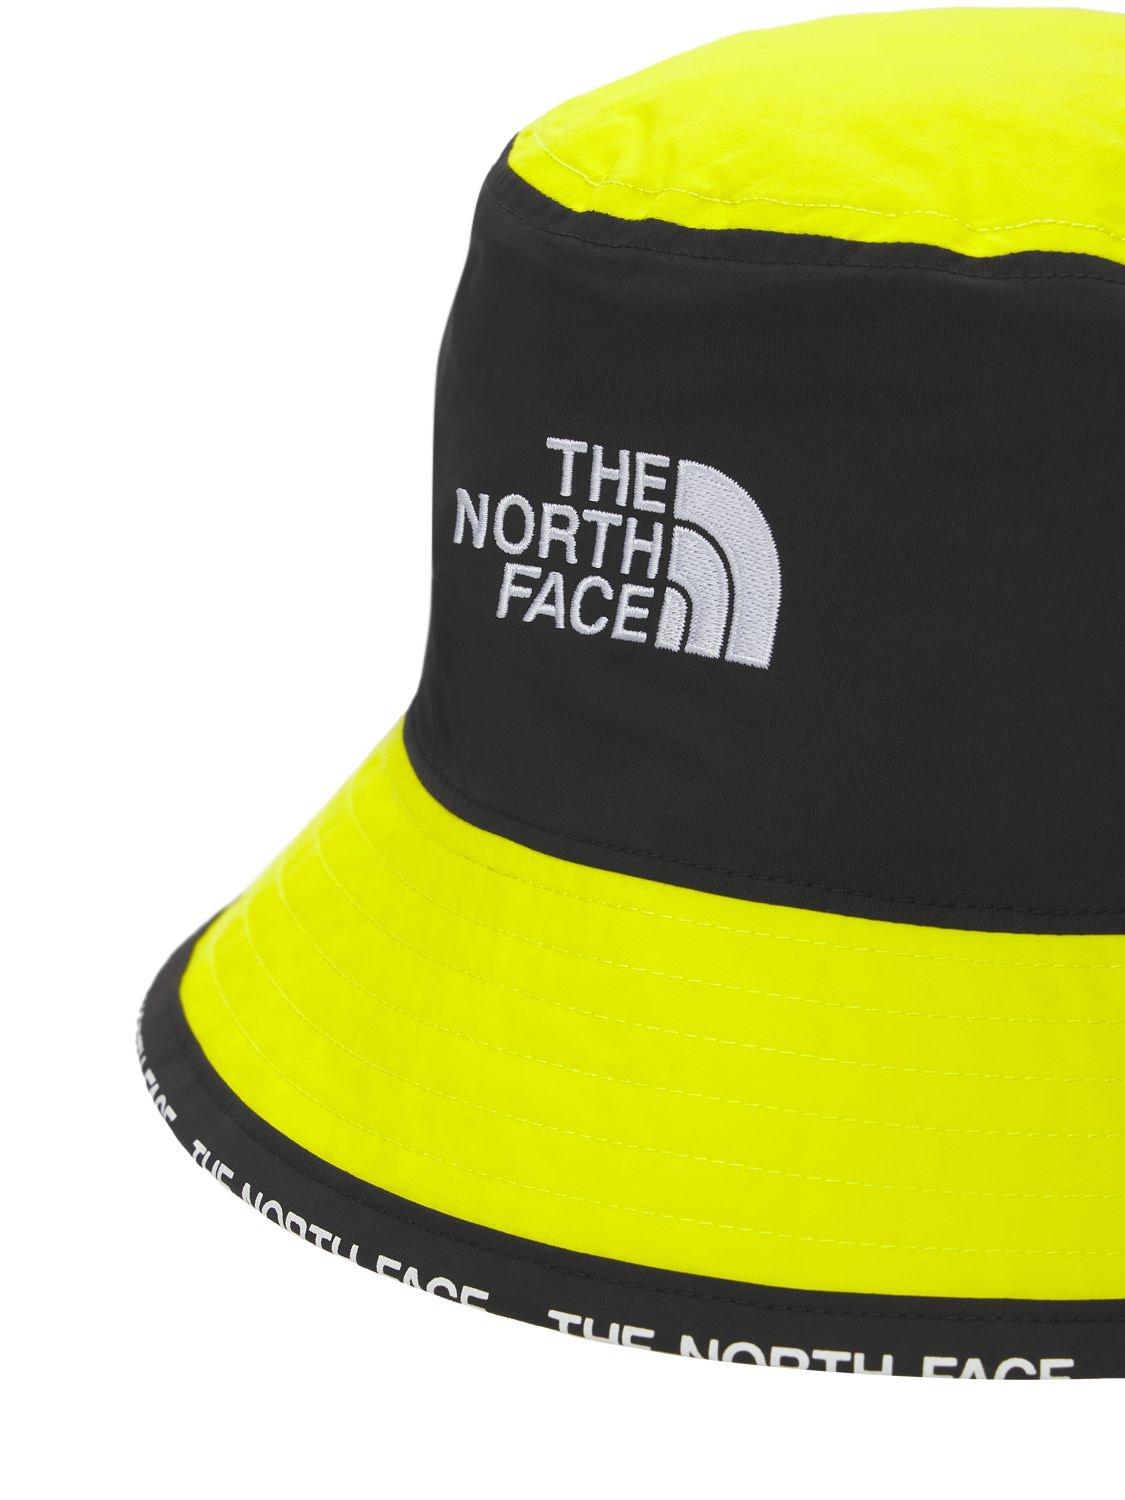 The North Face Cypress Bucket Hat in Black/Yellow (Yellow) for Men | Lyst